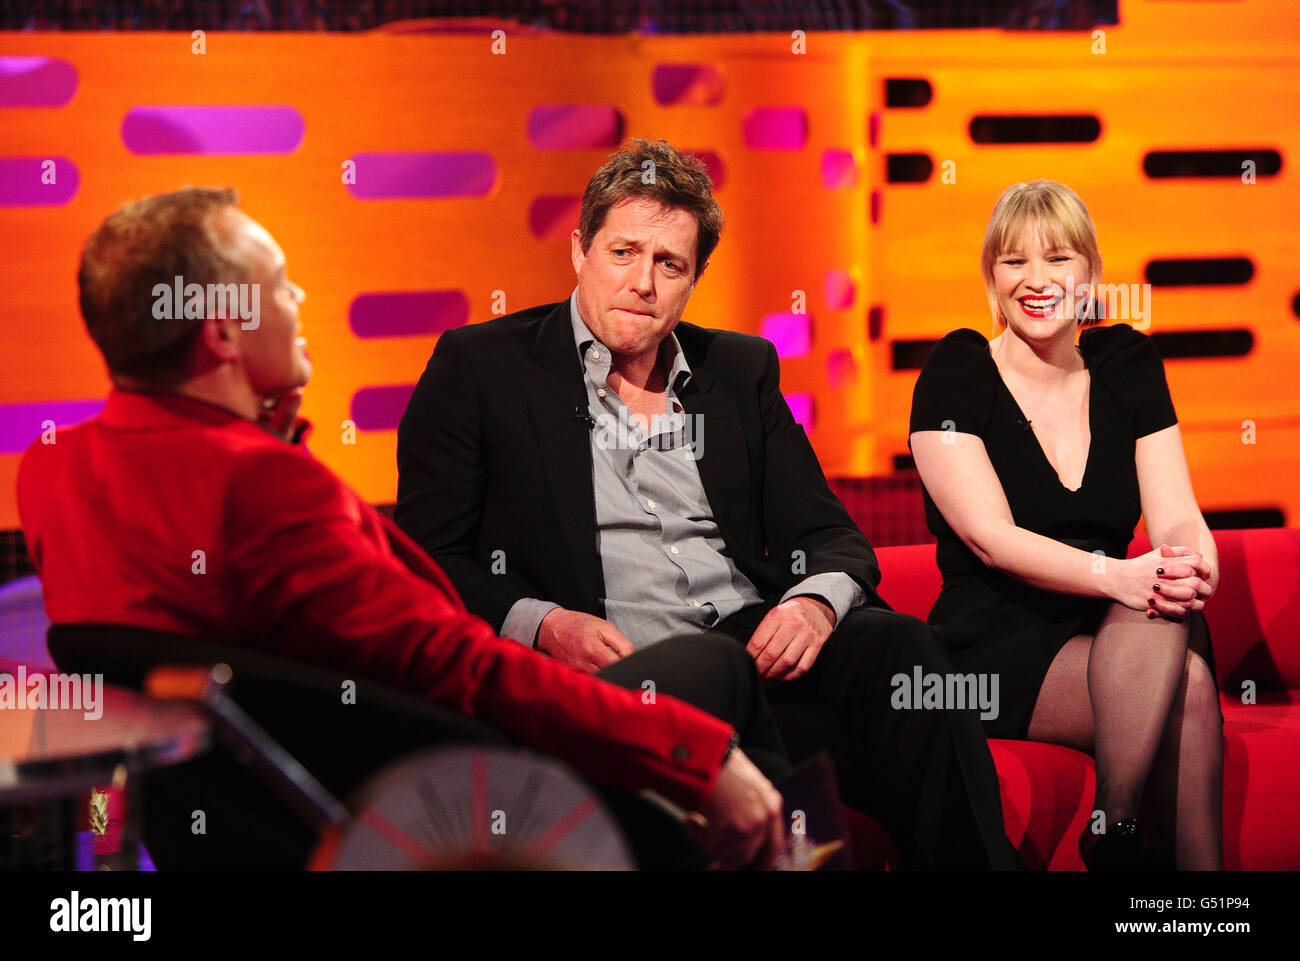 (Left - right) Graham Norton, Hugh Grant and Joanna Page during the filming of the Graham Norton Show at The London Studios, south London, to be aired on BBC One on Friday evening. PRESS ASSOCIATION Photo. Picture date: Thursday March 15, 2012. Photo credit should read: Ian West/PA Wire Stock Photo